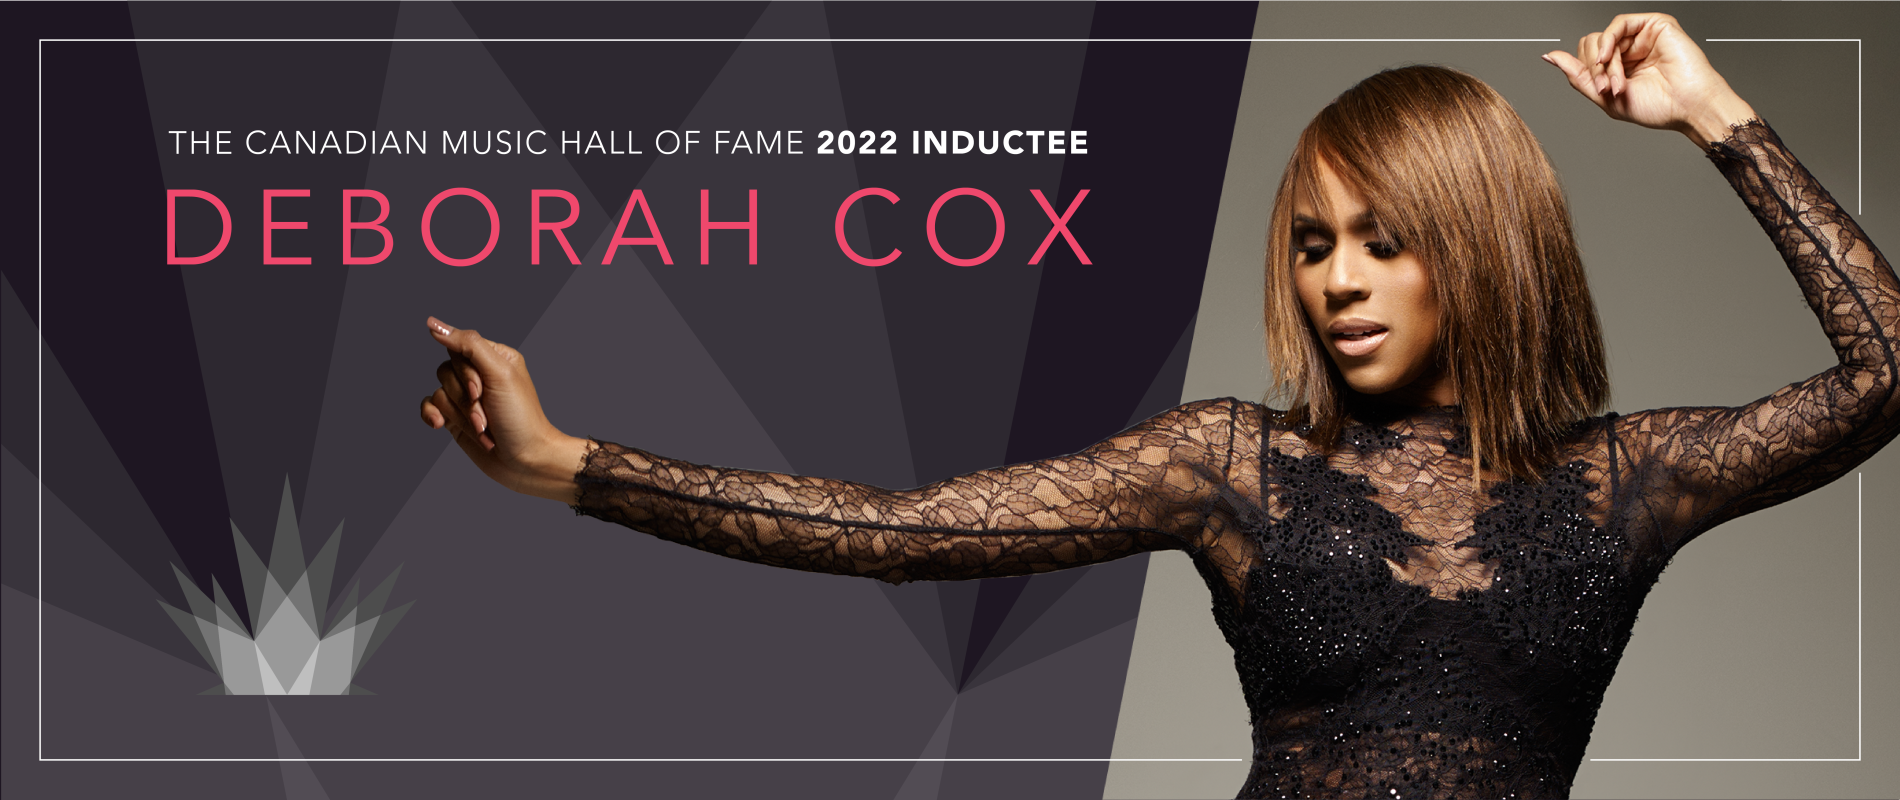 National Music Centre Launches Special Exhibition Dedicated to Deborah Cox on May 14